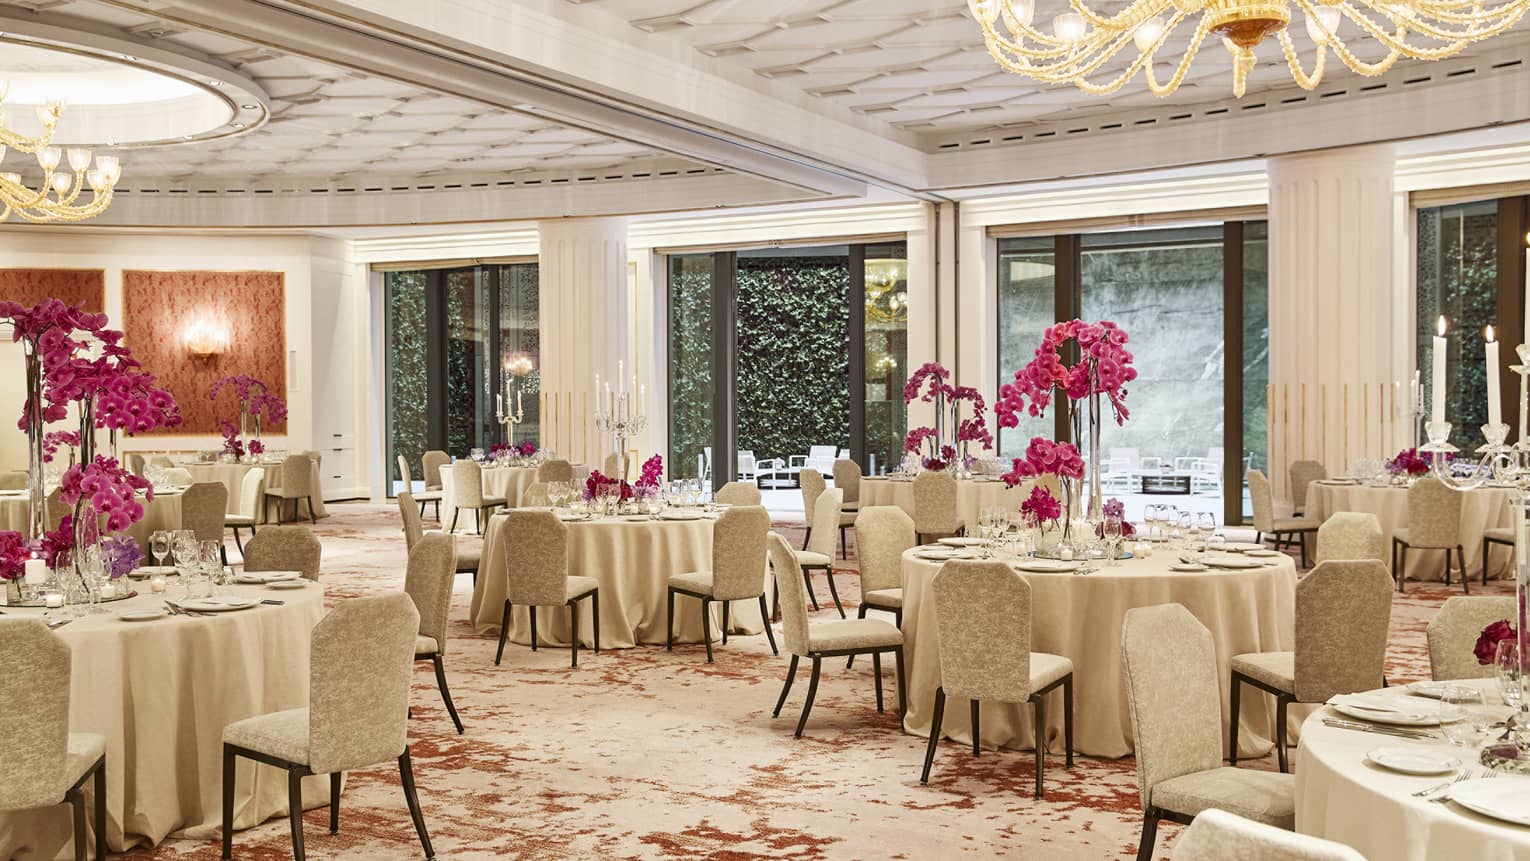 Ballroom with circular banquet tables, gold chandeliers, tall pink centrepieces